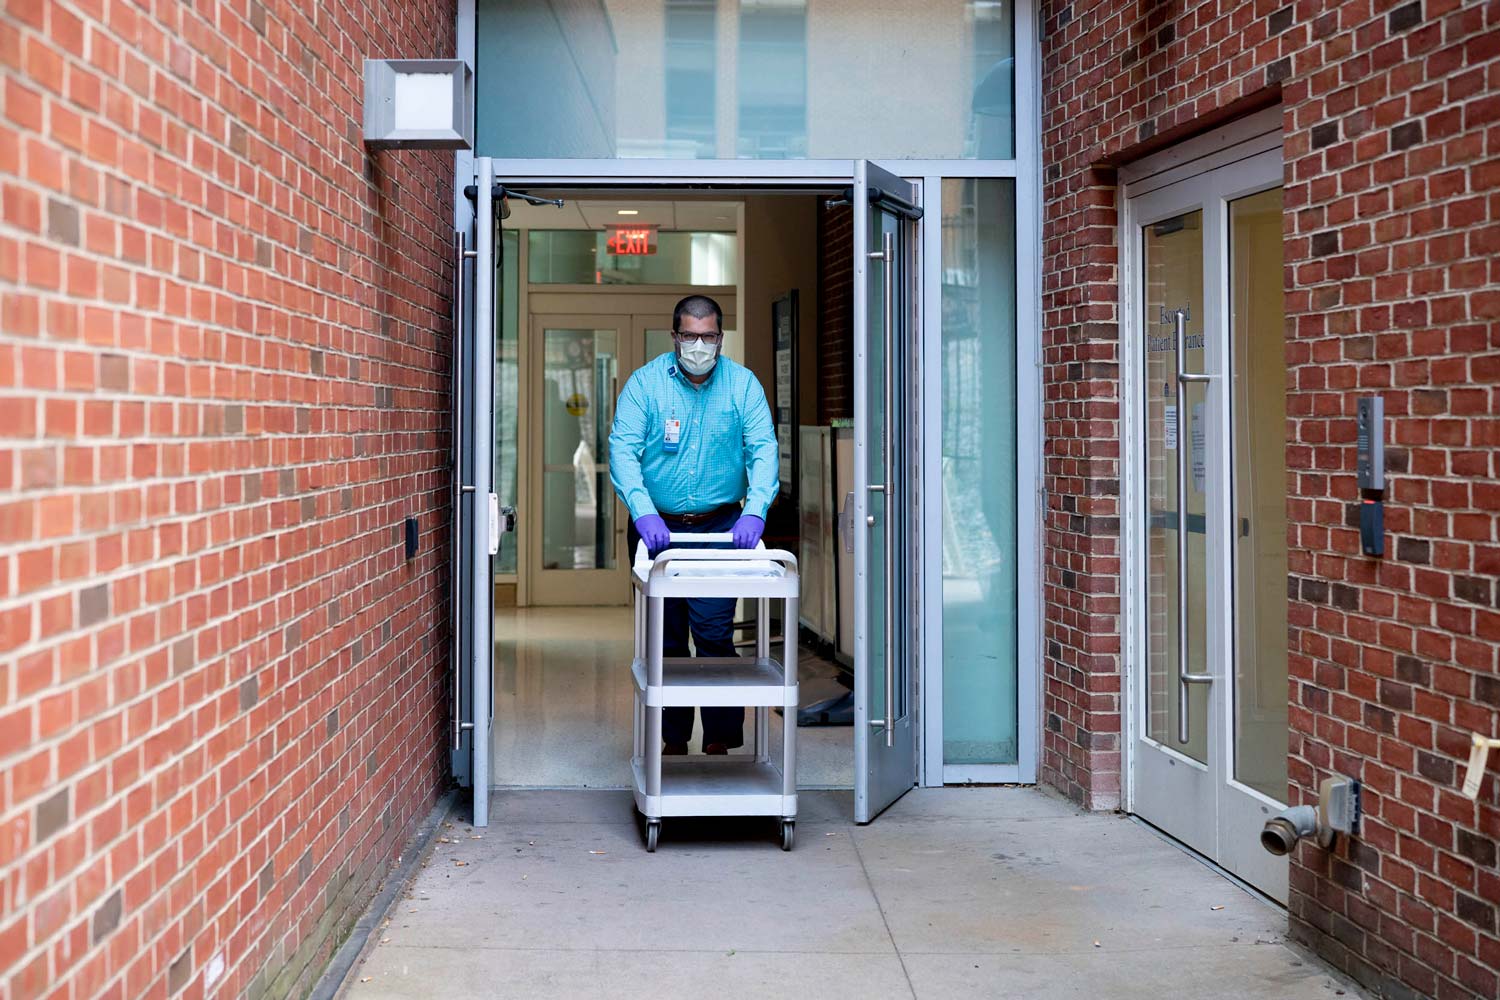 Man pushing a trolly outside of a building